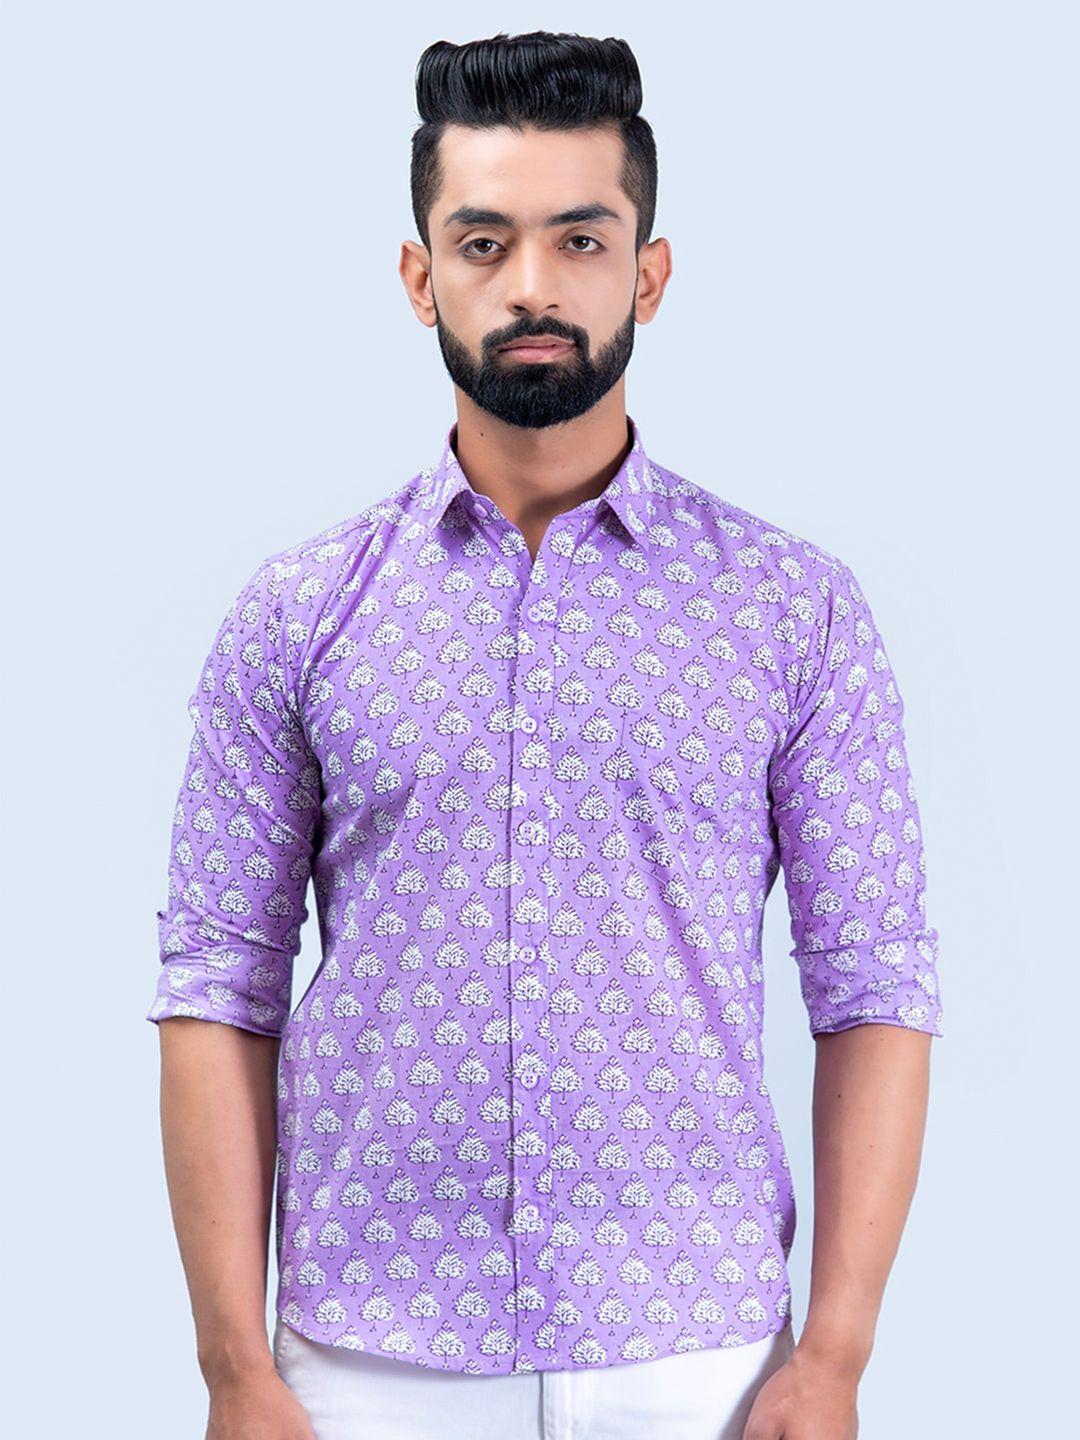 tistabene men floral printed casual cotton shirt